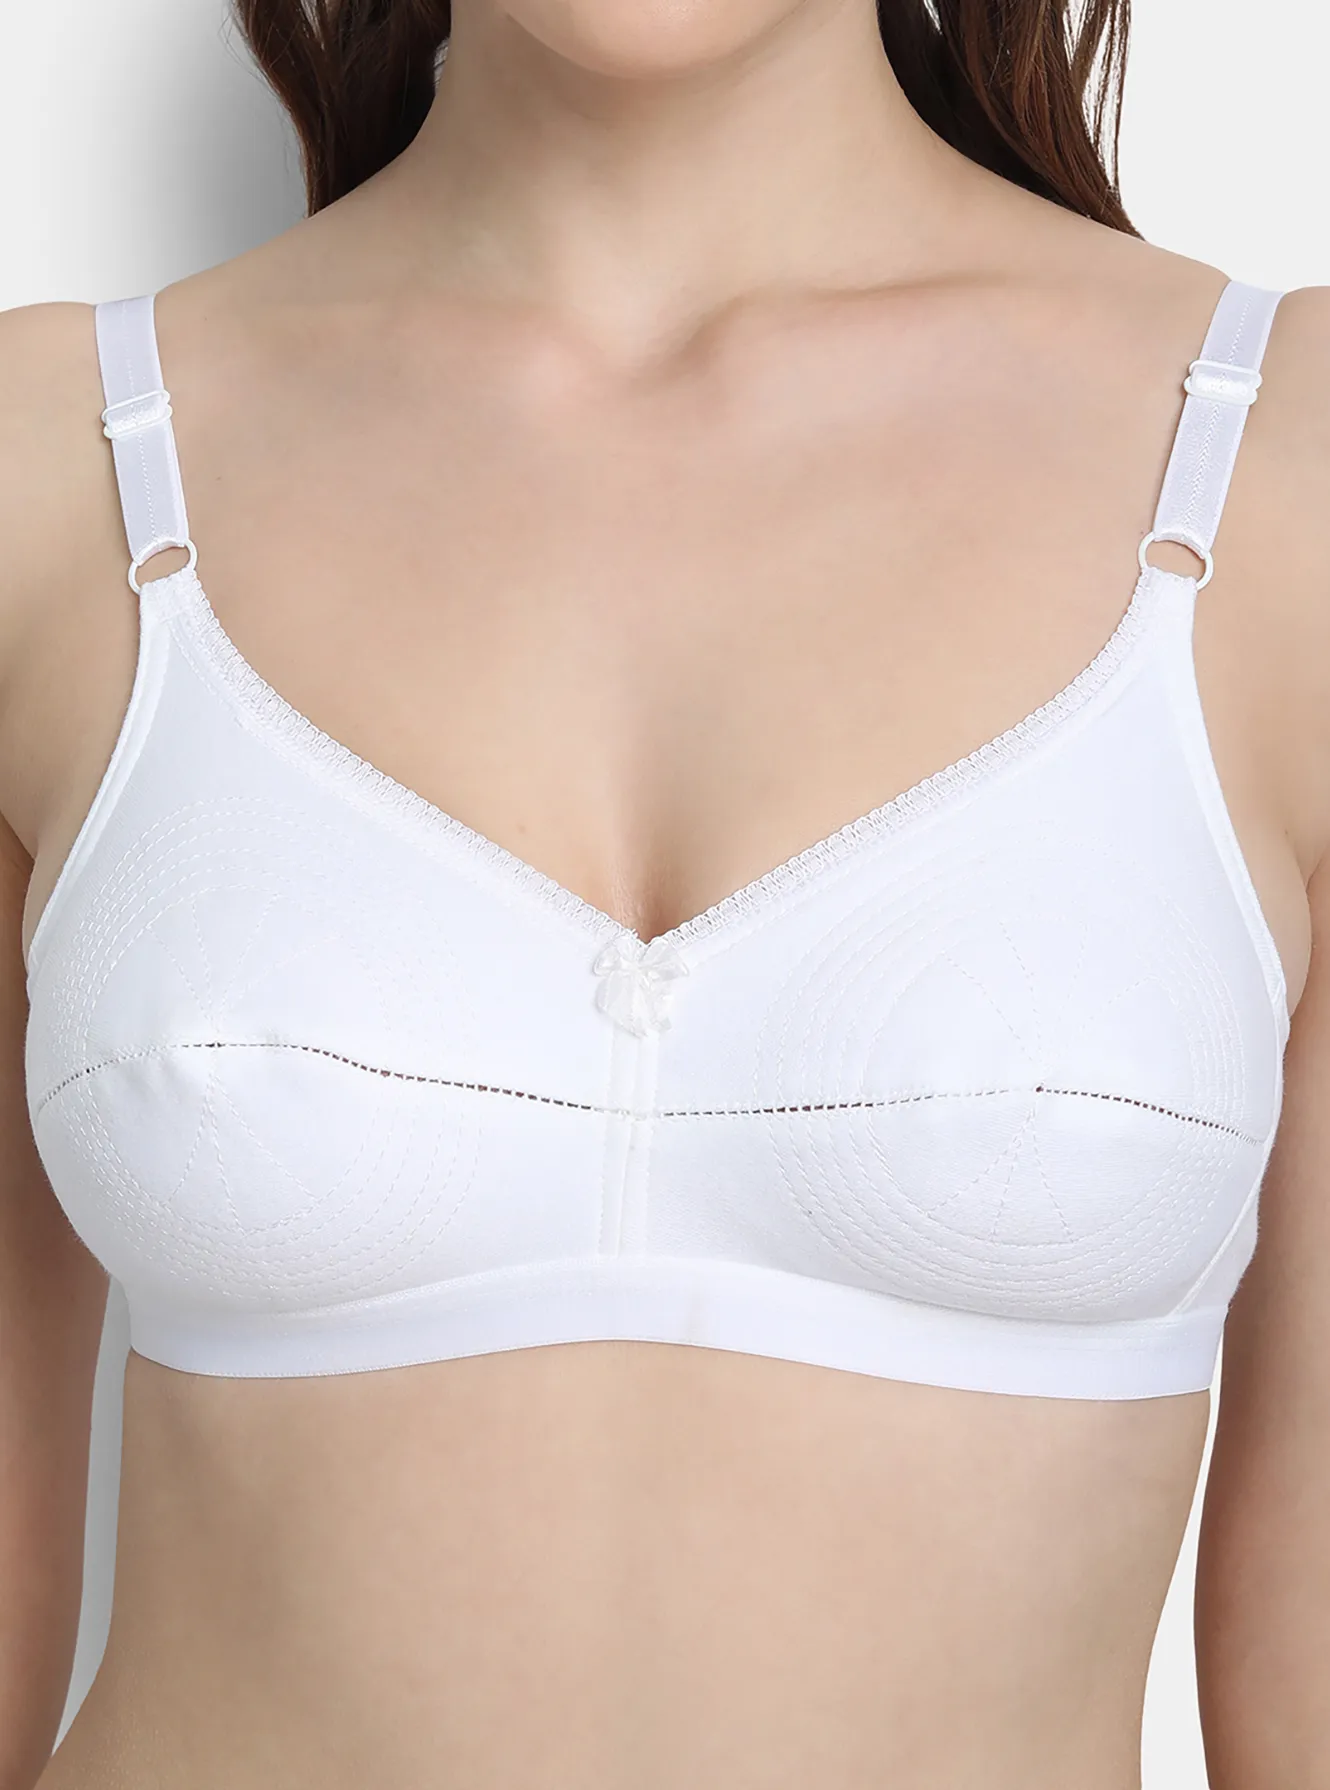 Lace Bra Adjustment Bra Lace Bra Thick Cup with Steel Ring Bra